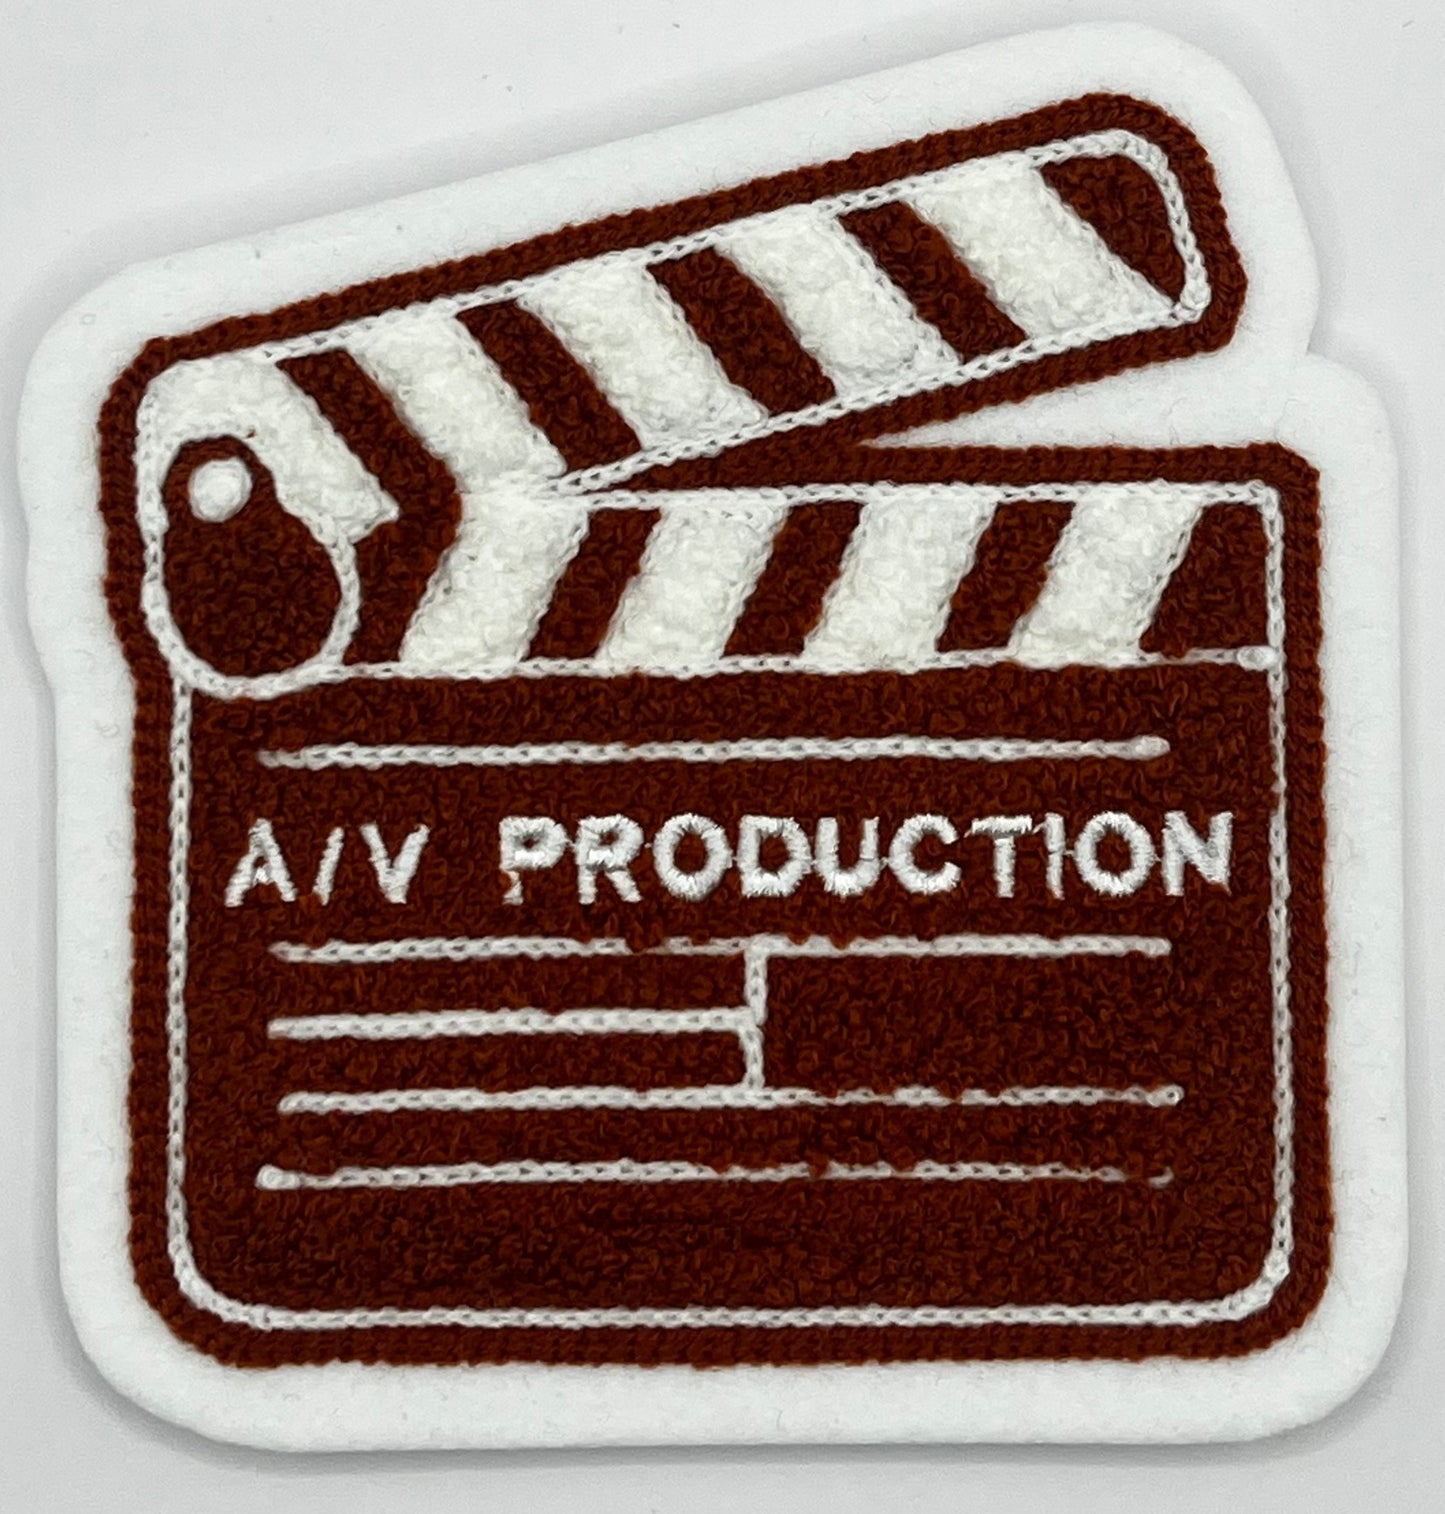 Westwood High School A/V Production Clapboard Sleeve Patch